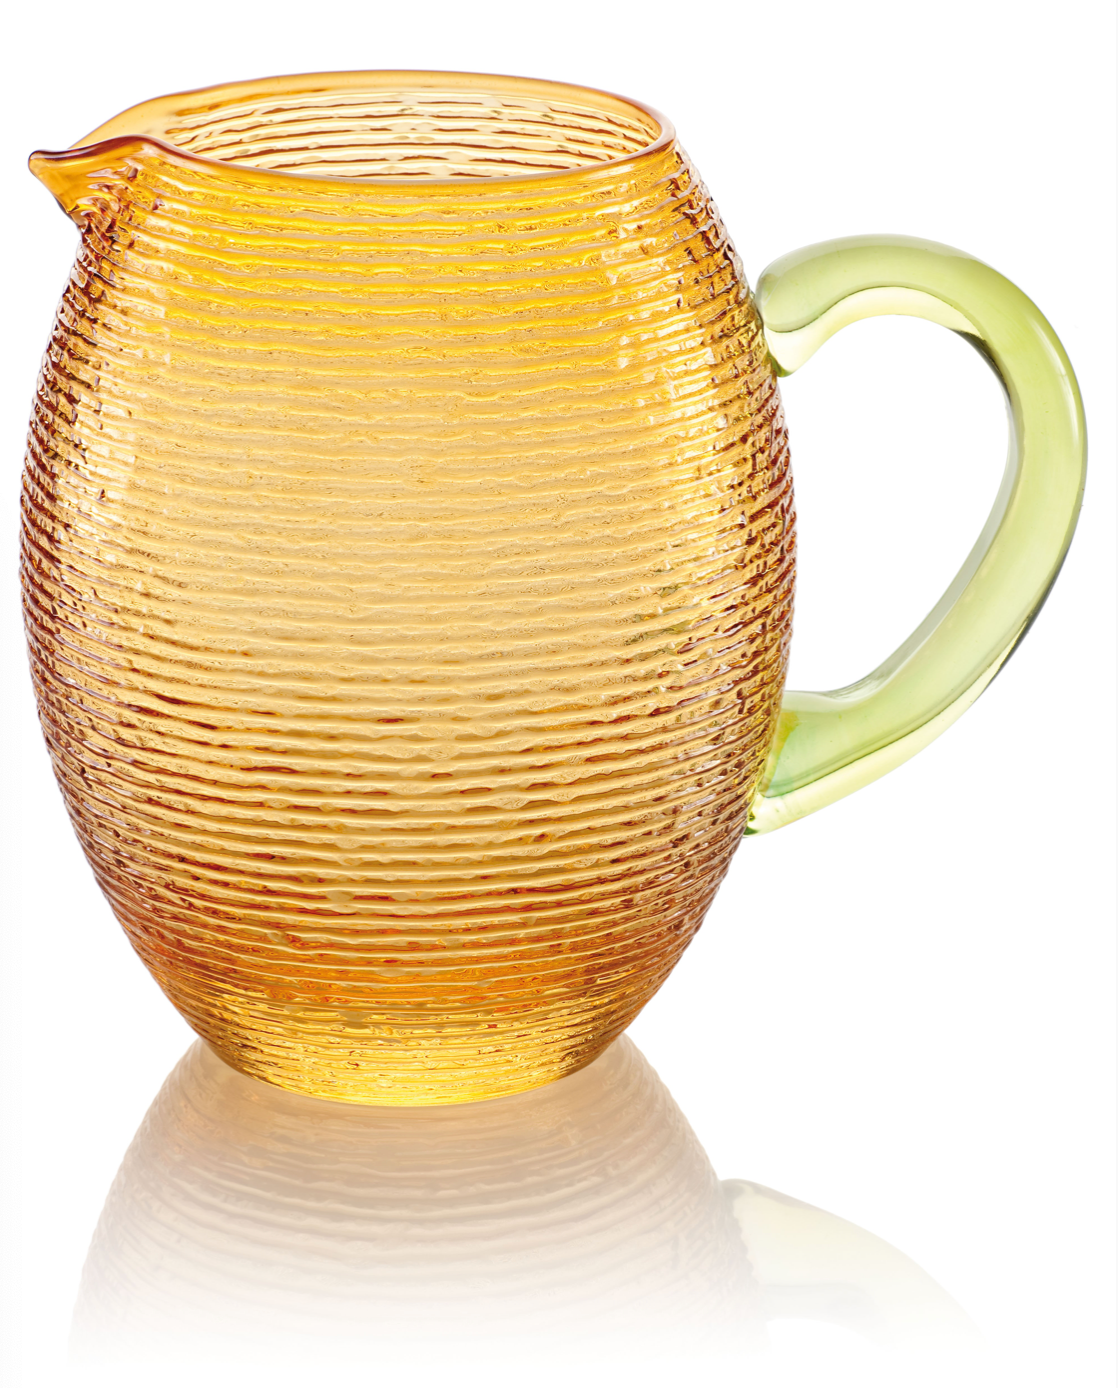 IVV Multicolor 1.5L Pitcher Amber with Acid Green Handle